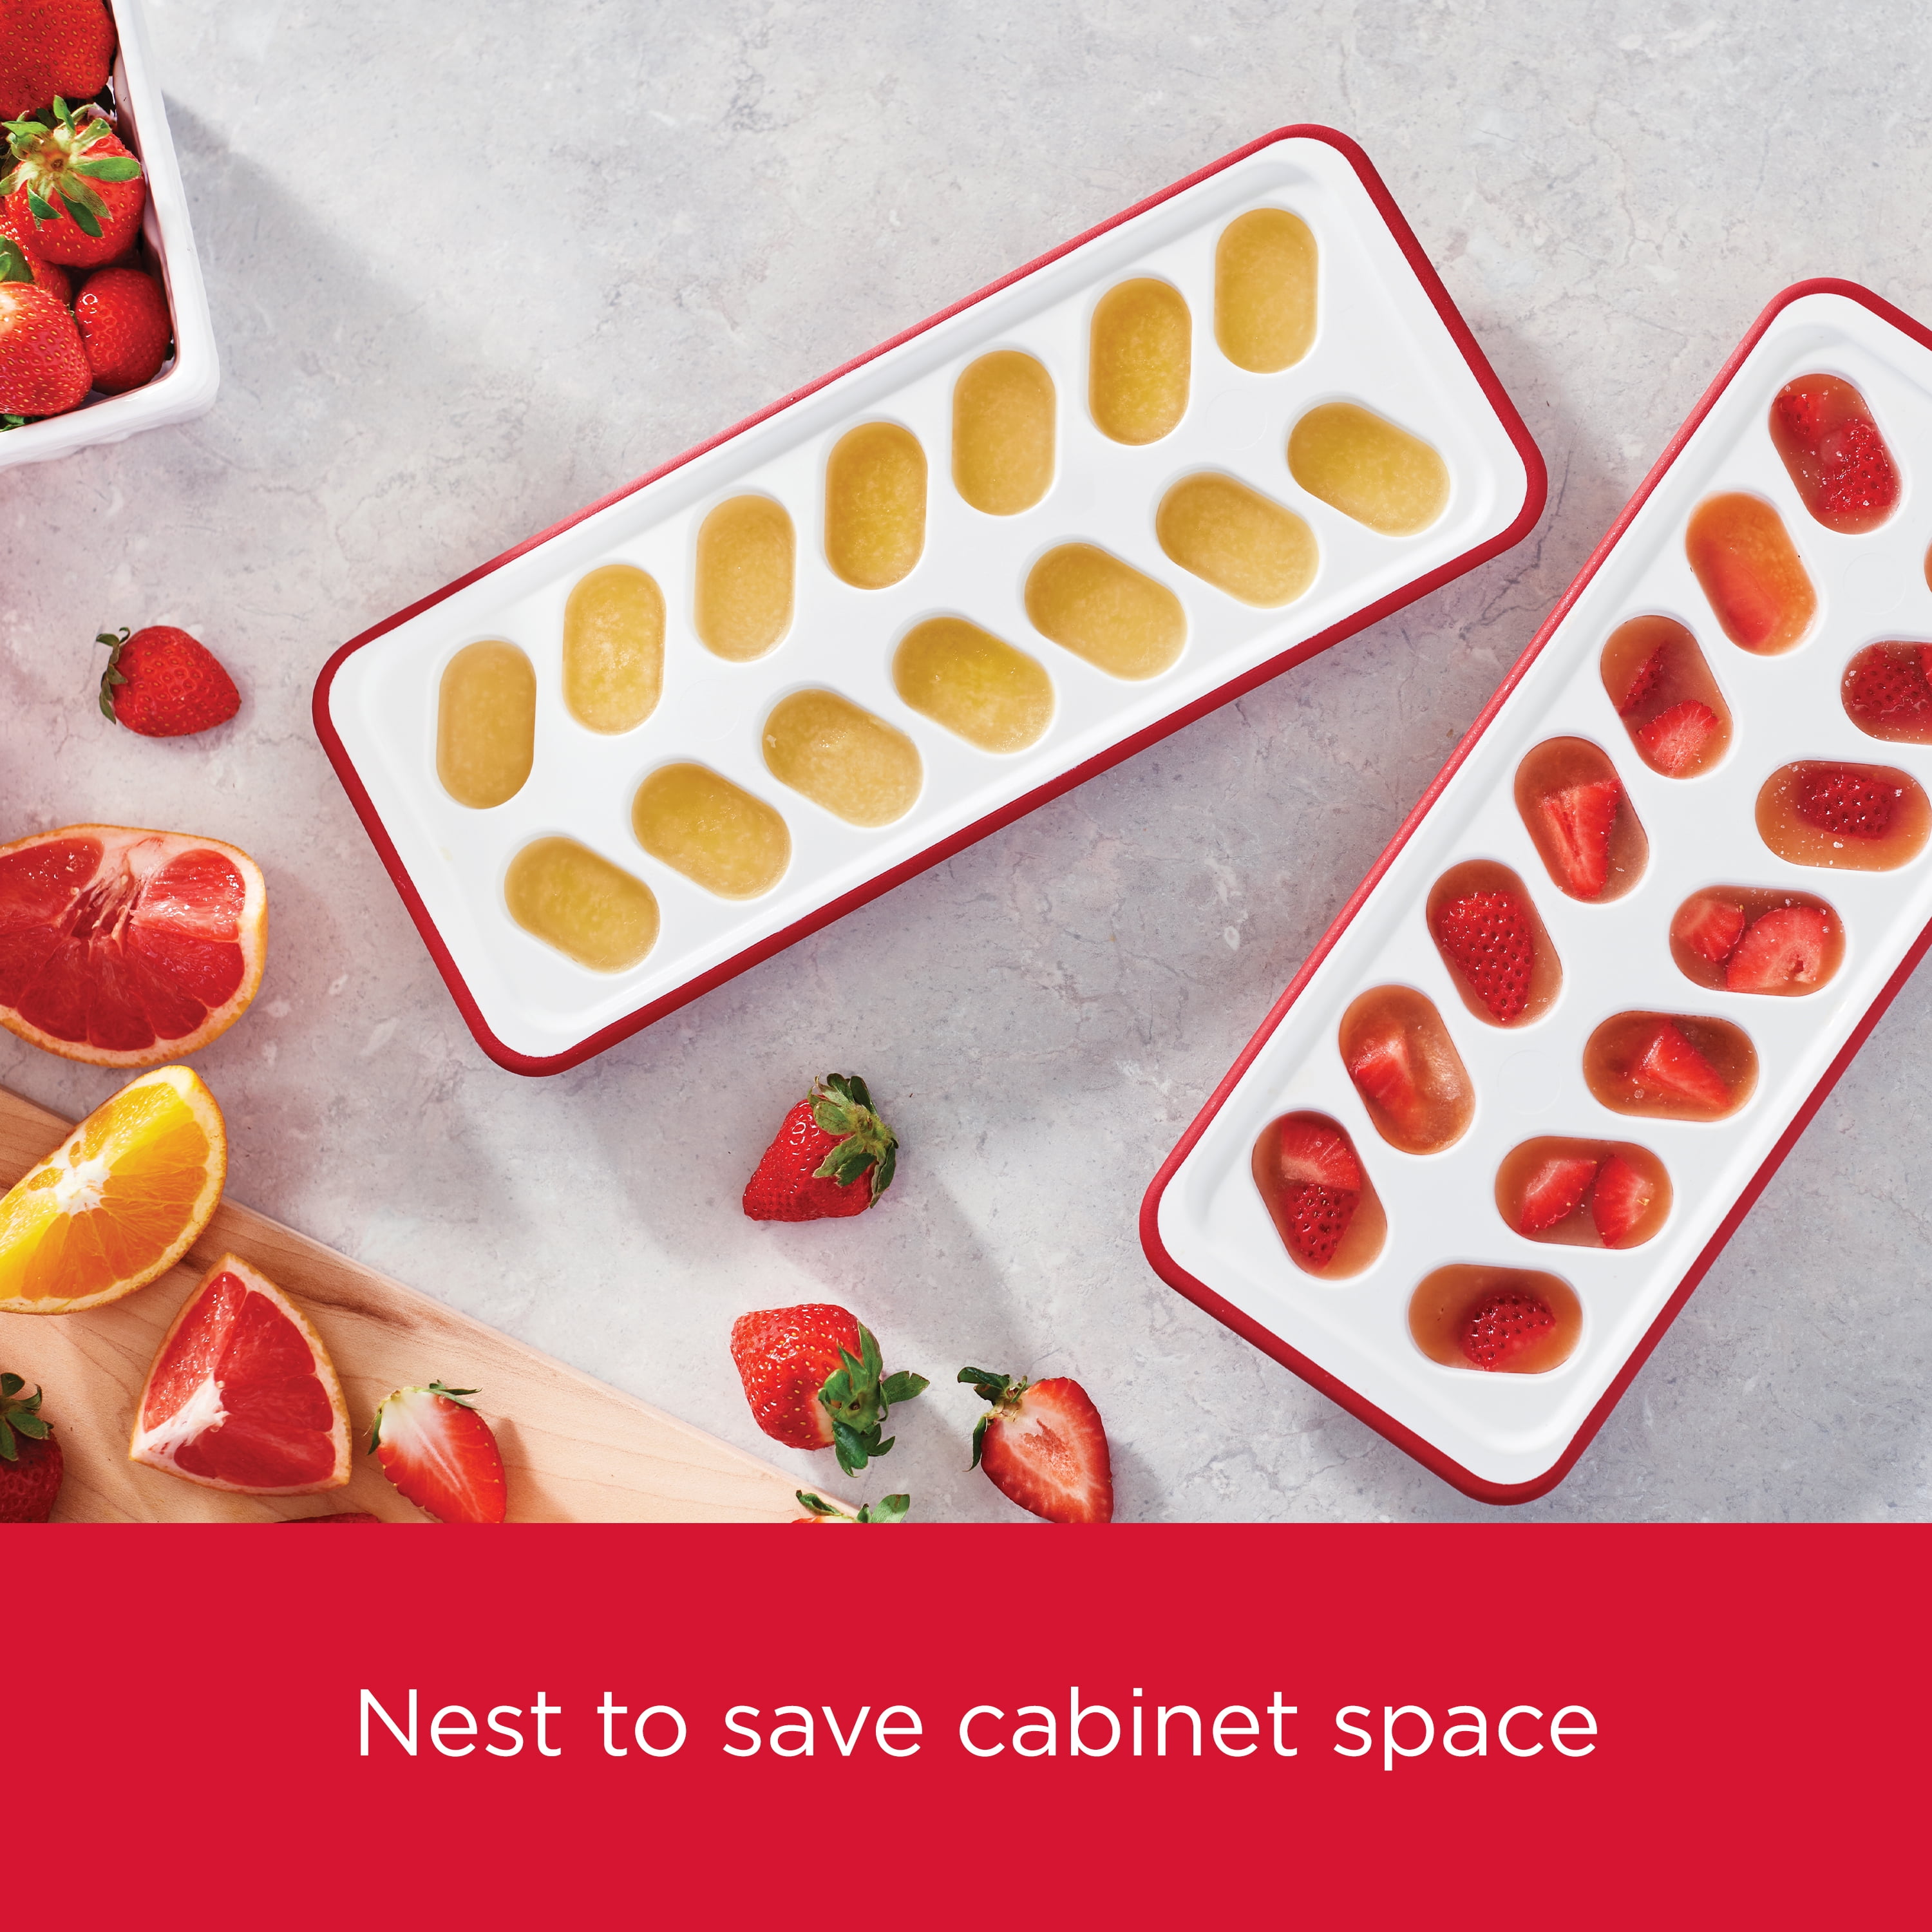 Rubbermaid Servin' Saver Deluxe Ice Cube Tray - Brownsboro Hardware & Paint